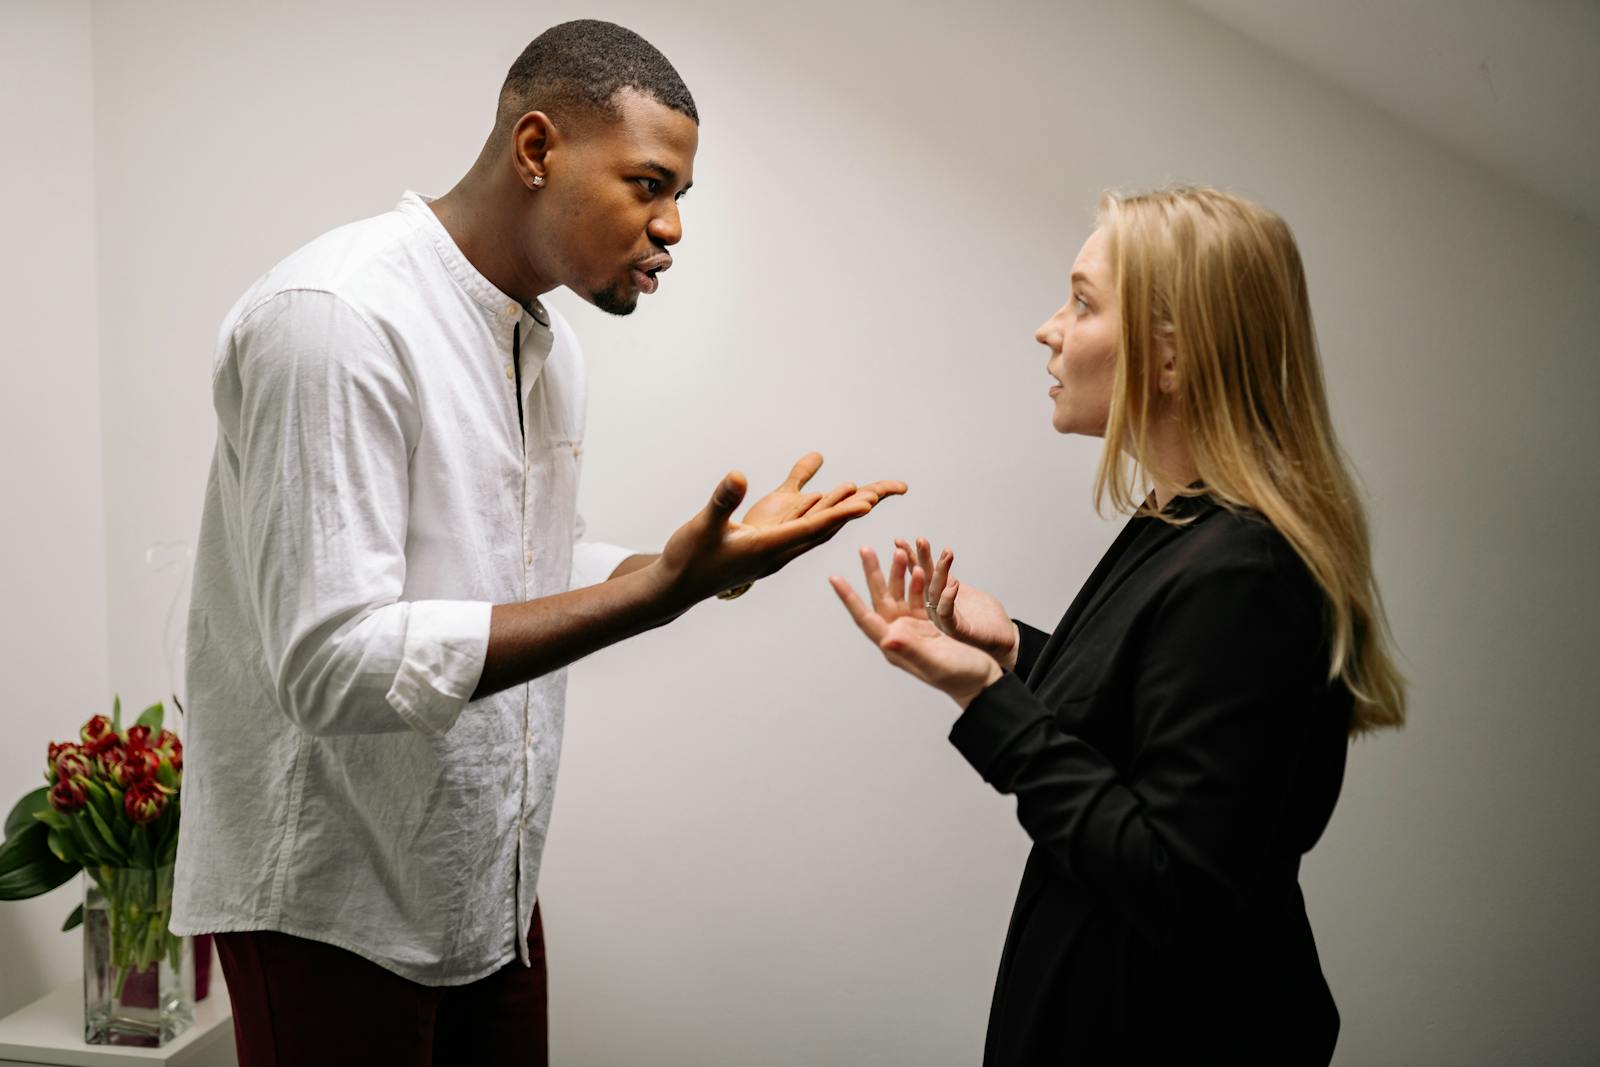 Man Having an Argument with a Woman